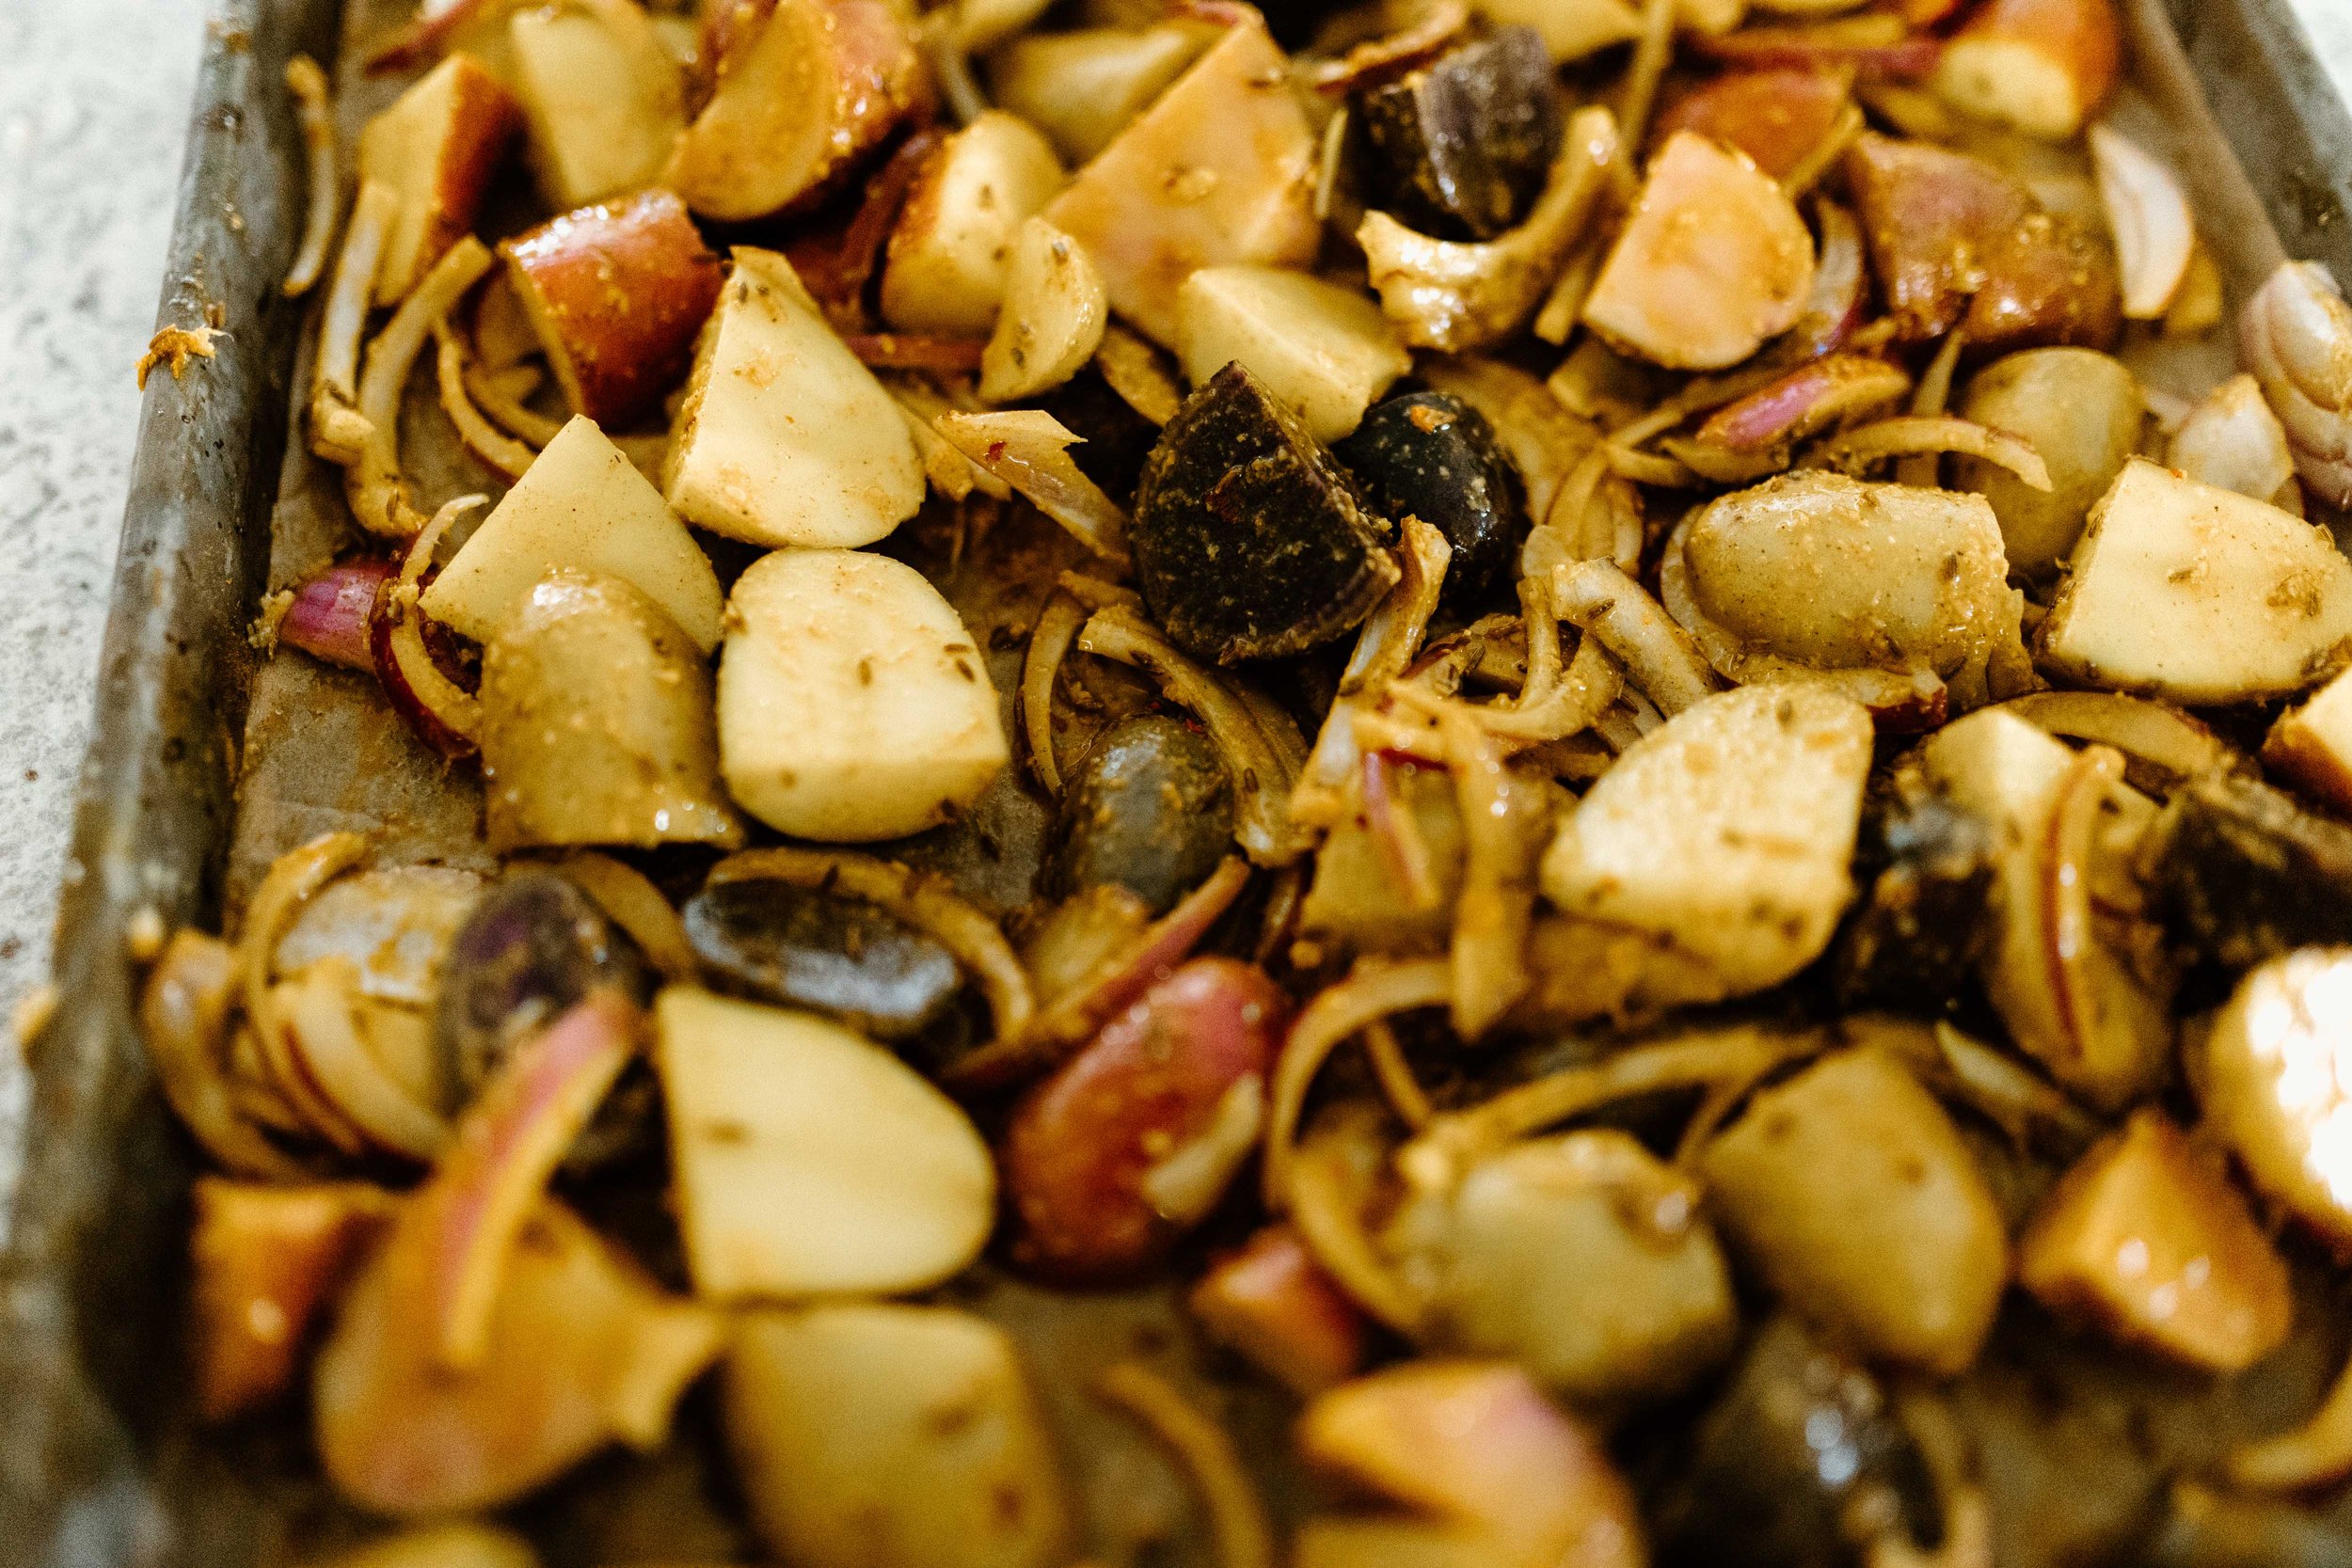 spices and oil go on the sheet pan aloo jeera potatoes